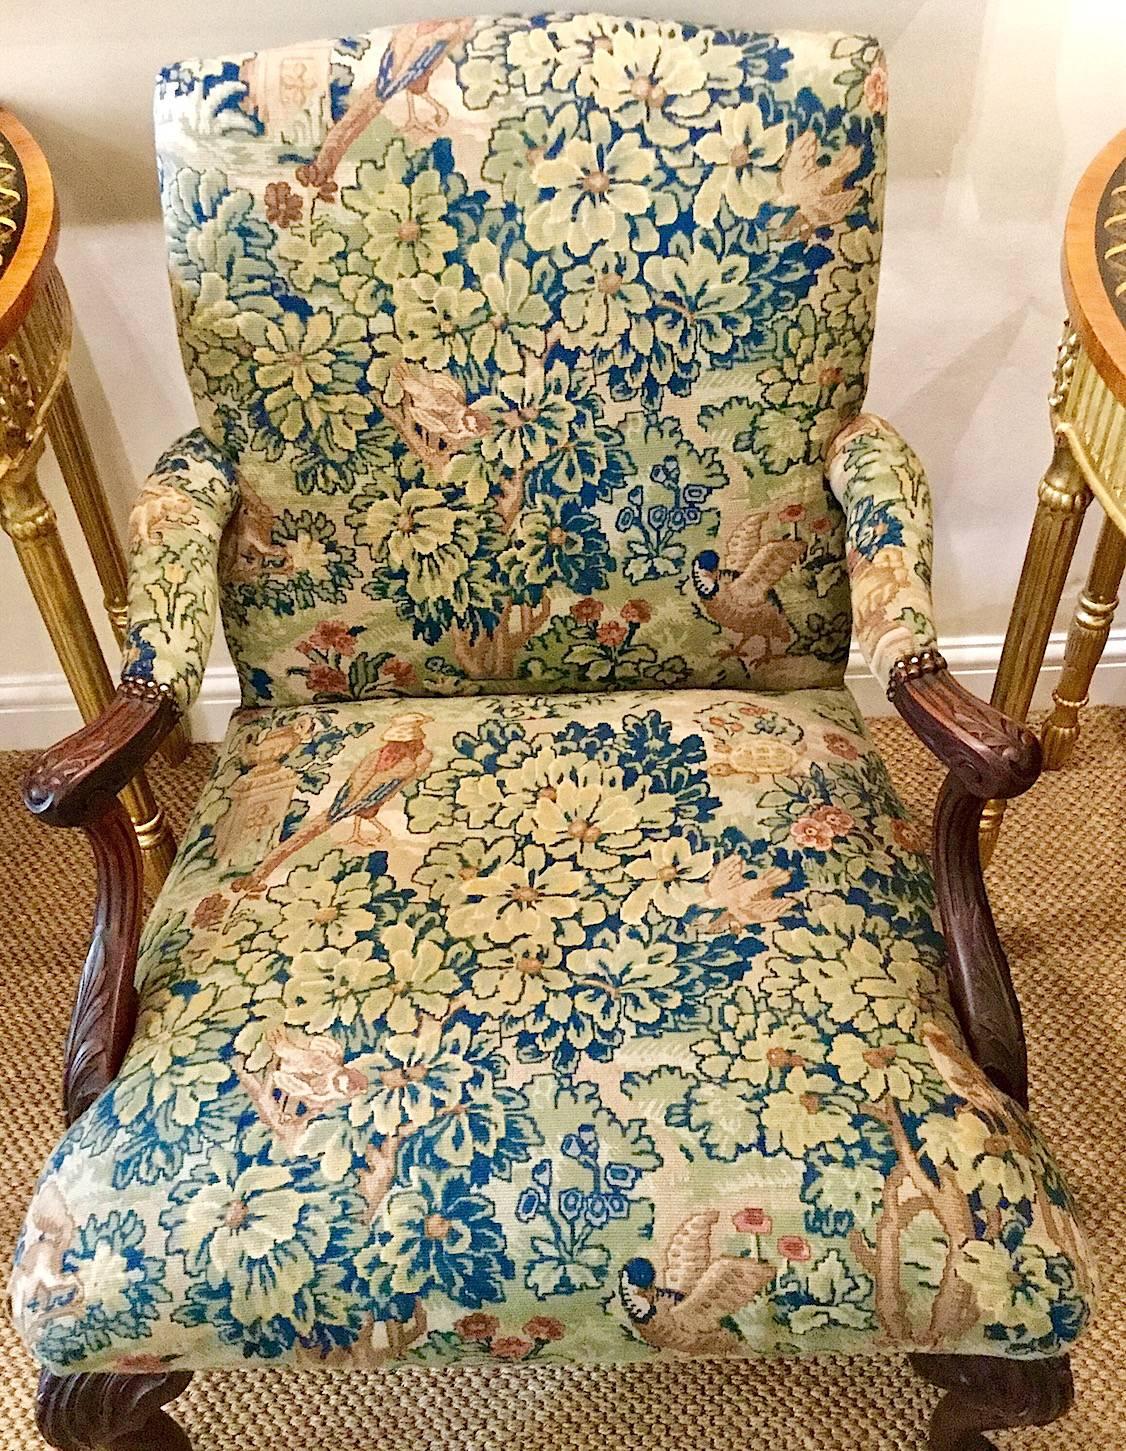 A Victorian George III style mahogany framed 'Gainsborough' armchair. This 'Gainsborough' style chair is from Ireland. It is upholstered in a Classic tapestry fabric with birds and foliage. Detailed carving on the arms and legs. It is very